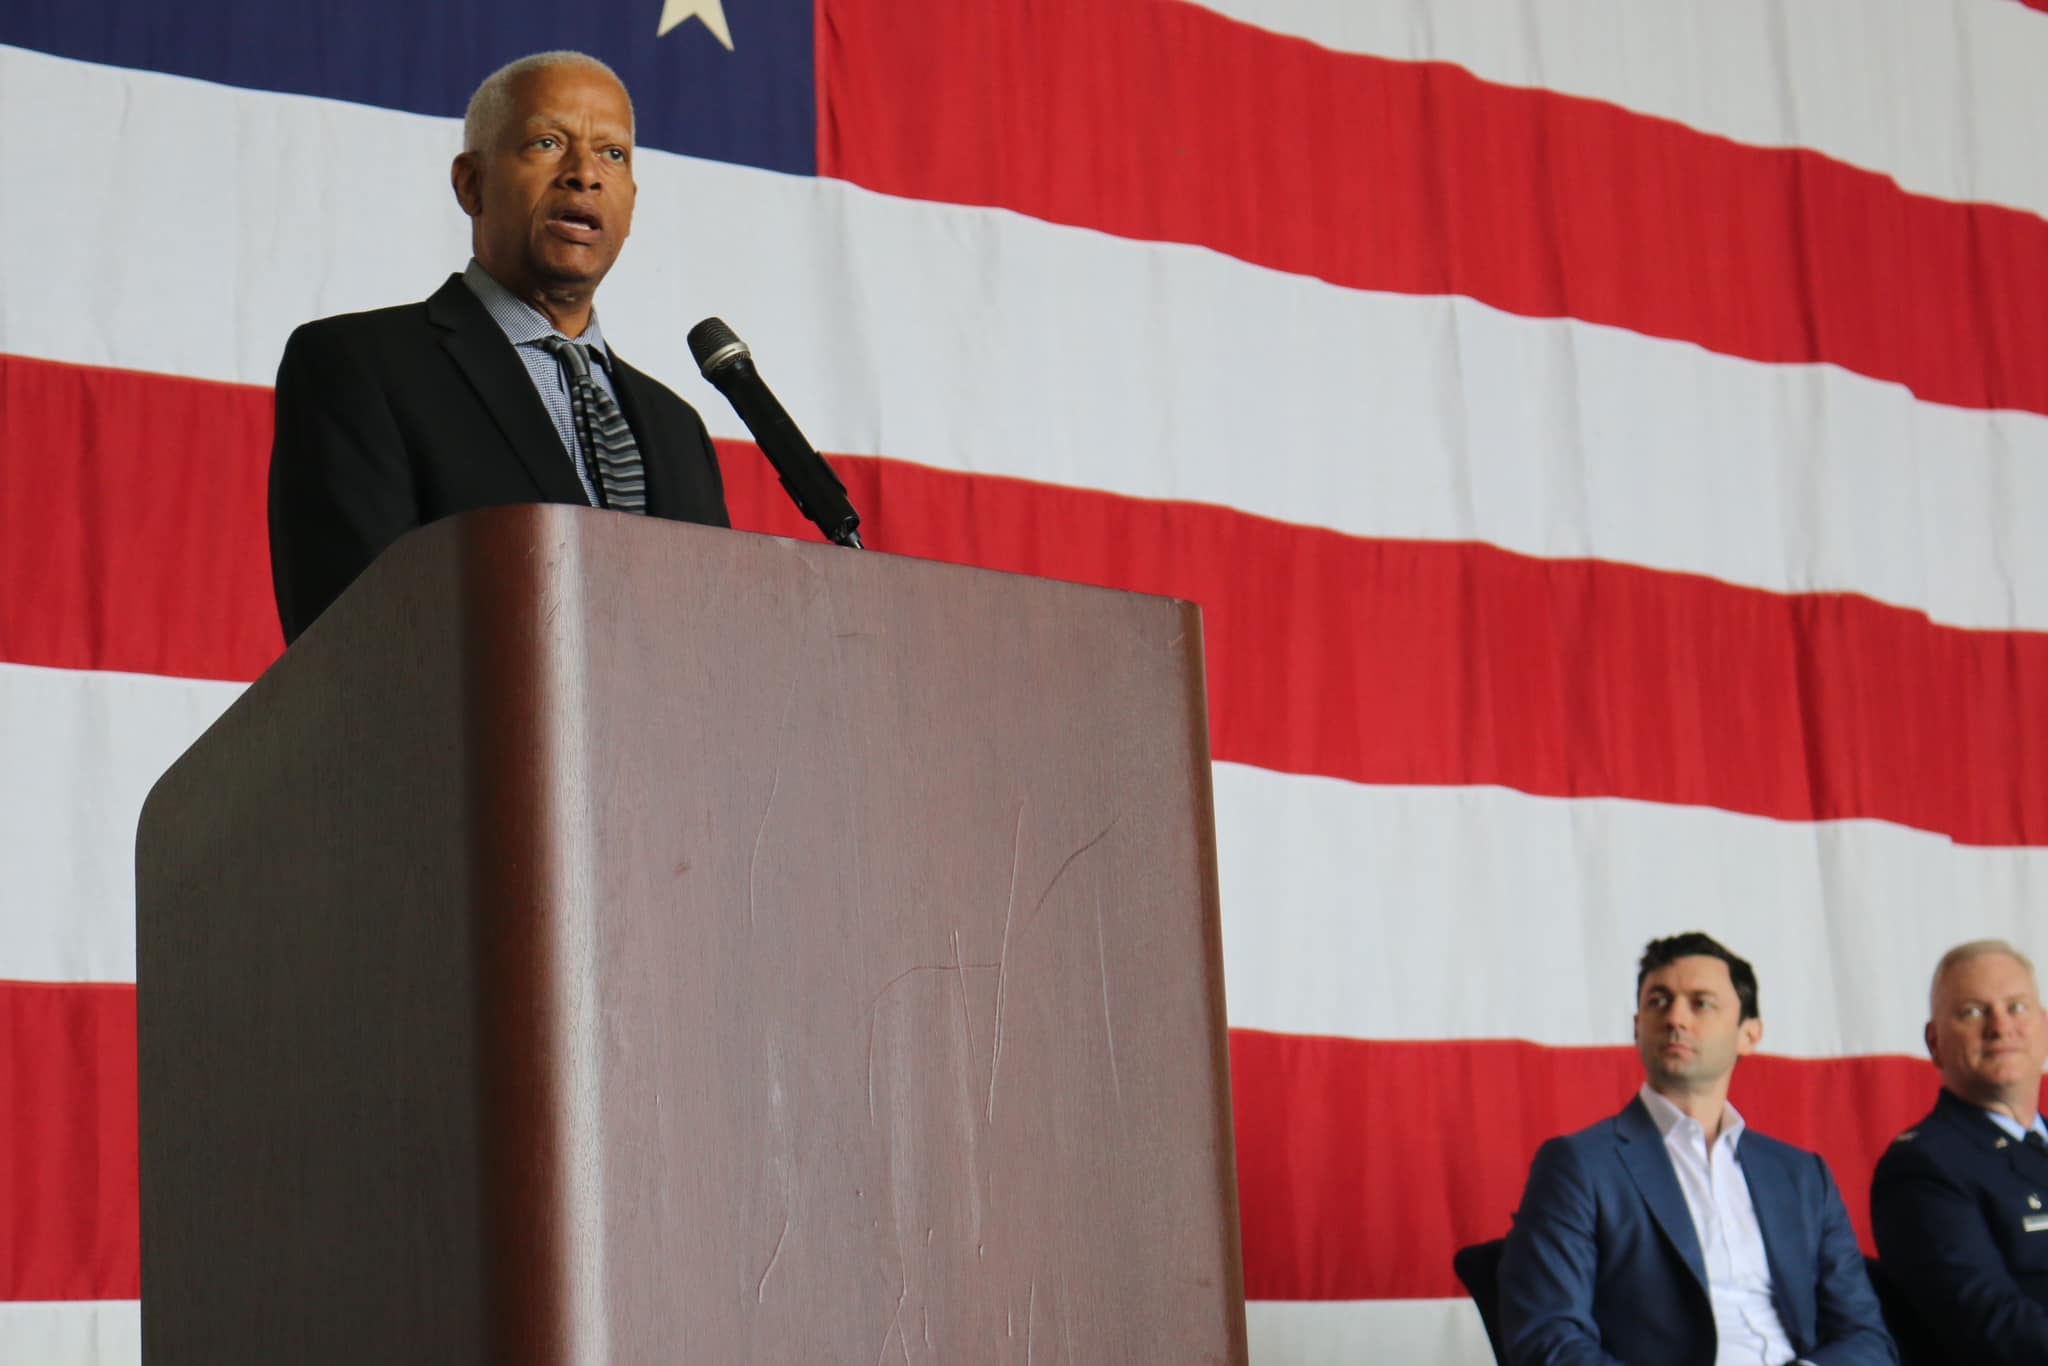 EXCLUSIVE: Congressman Hank Johnson Speaks Out Against Heavy-Handed Policing on College Campuses